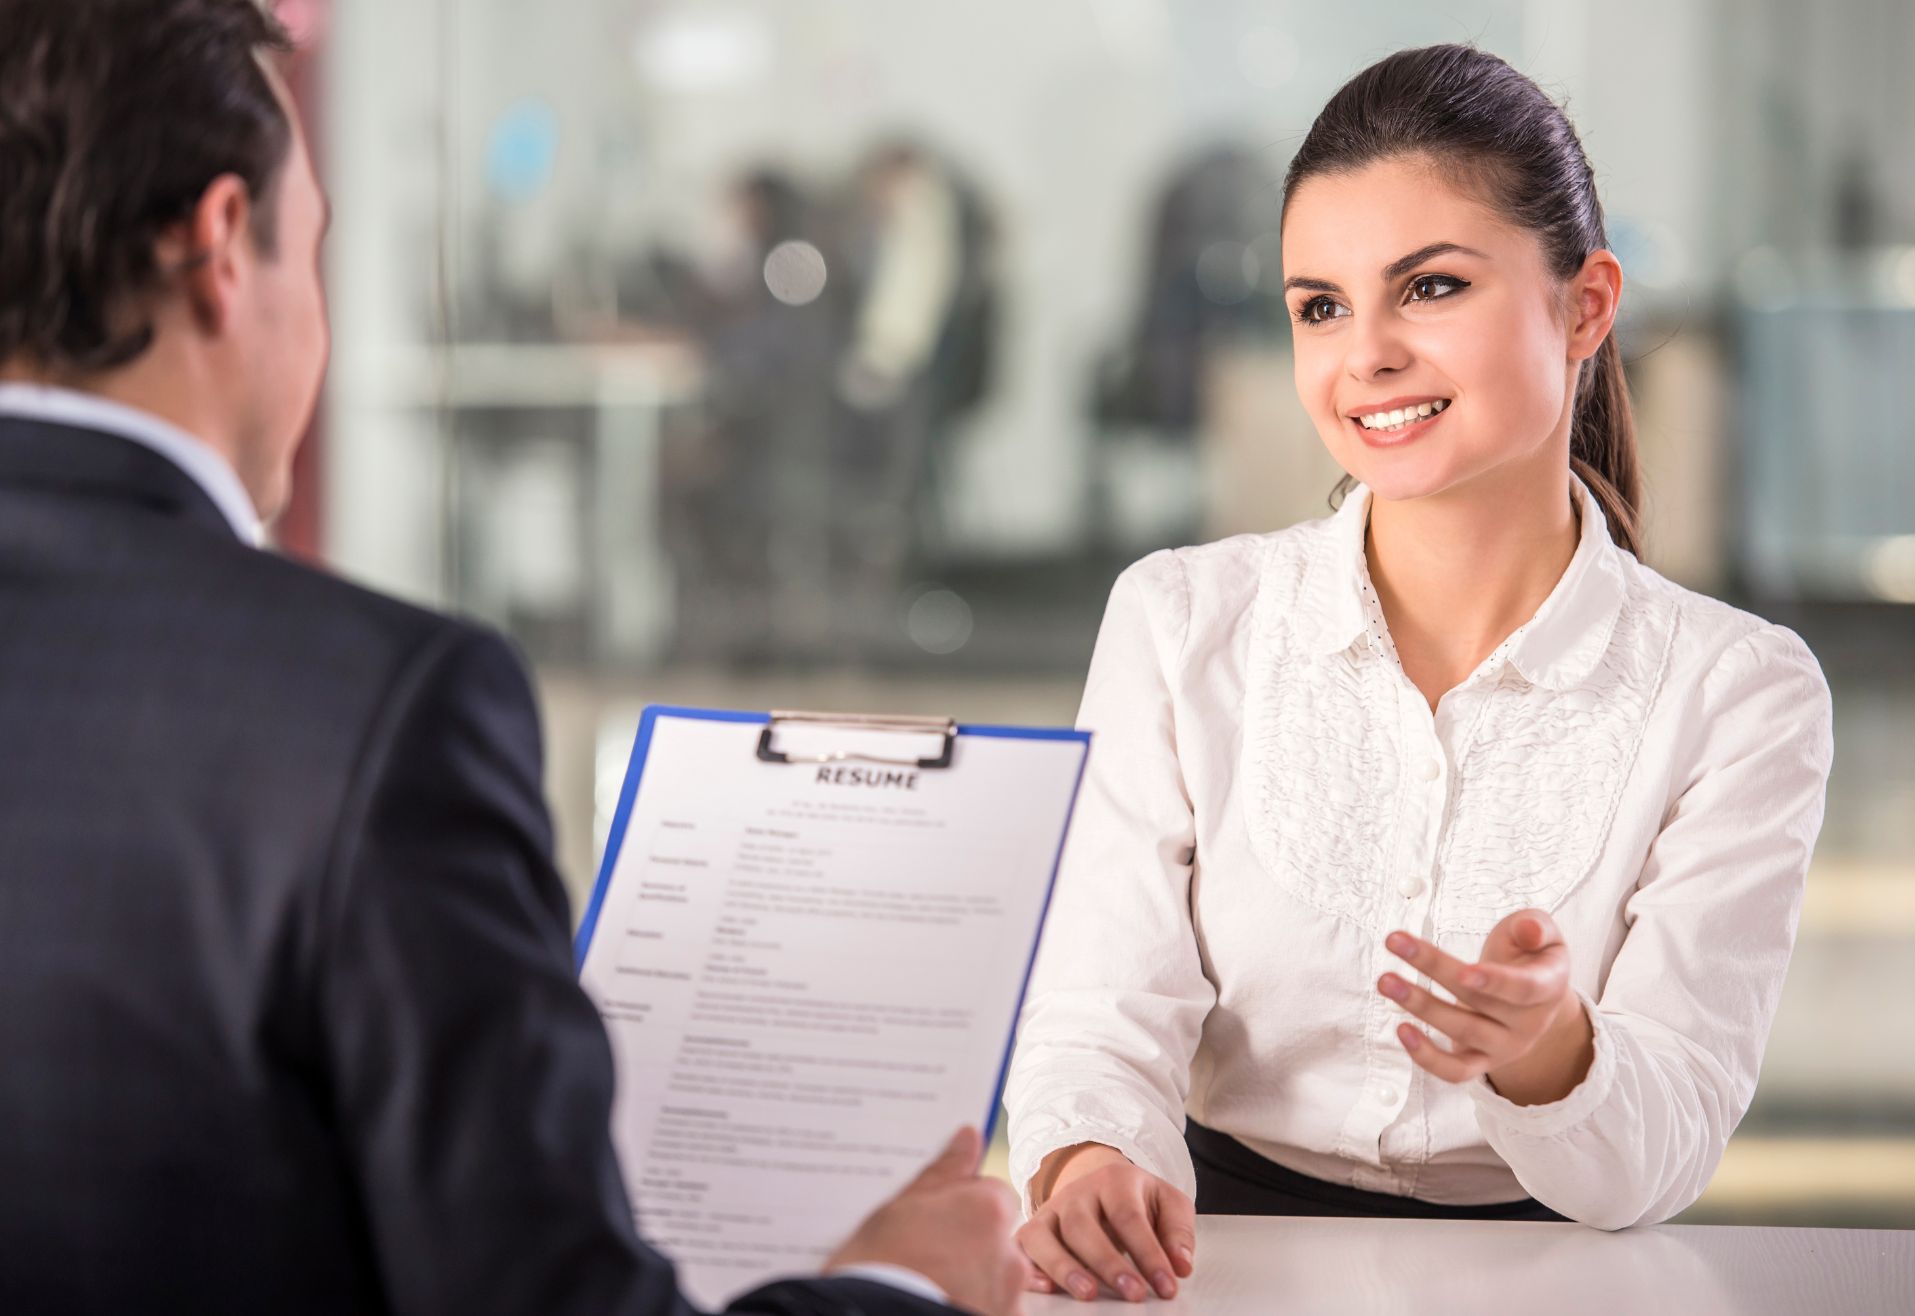 How to Ace Your Real Estate Job Interview